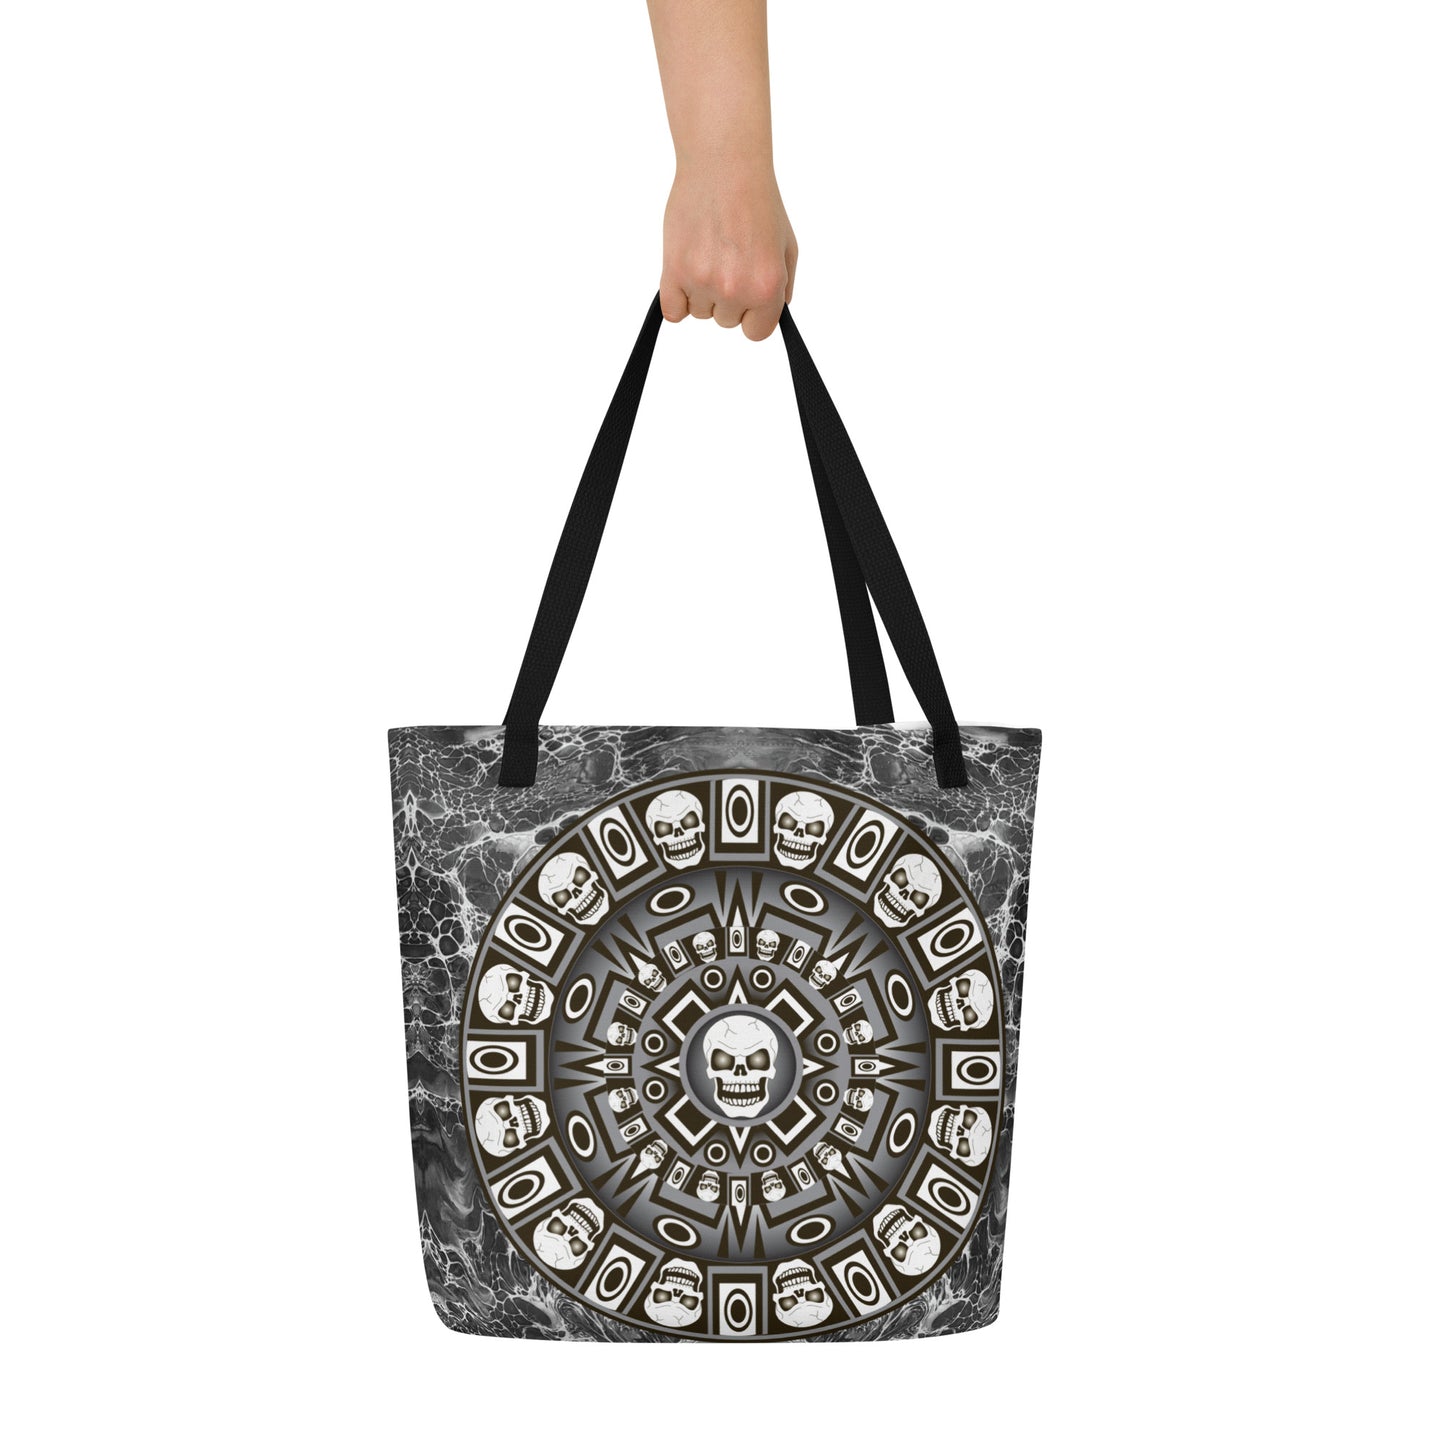 All-Over Print Large Tote Bag - SW-005